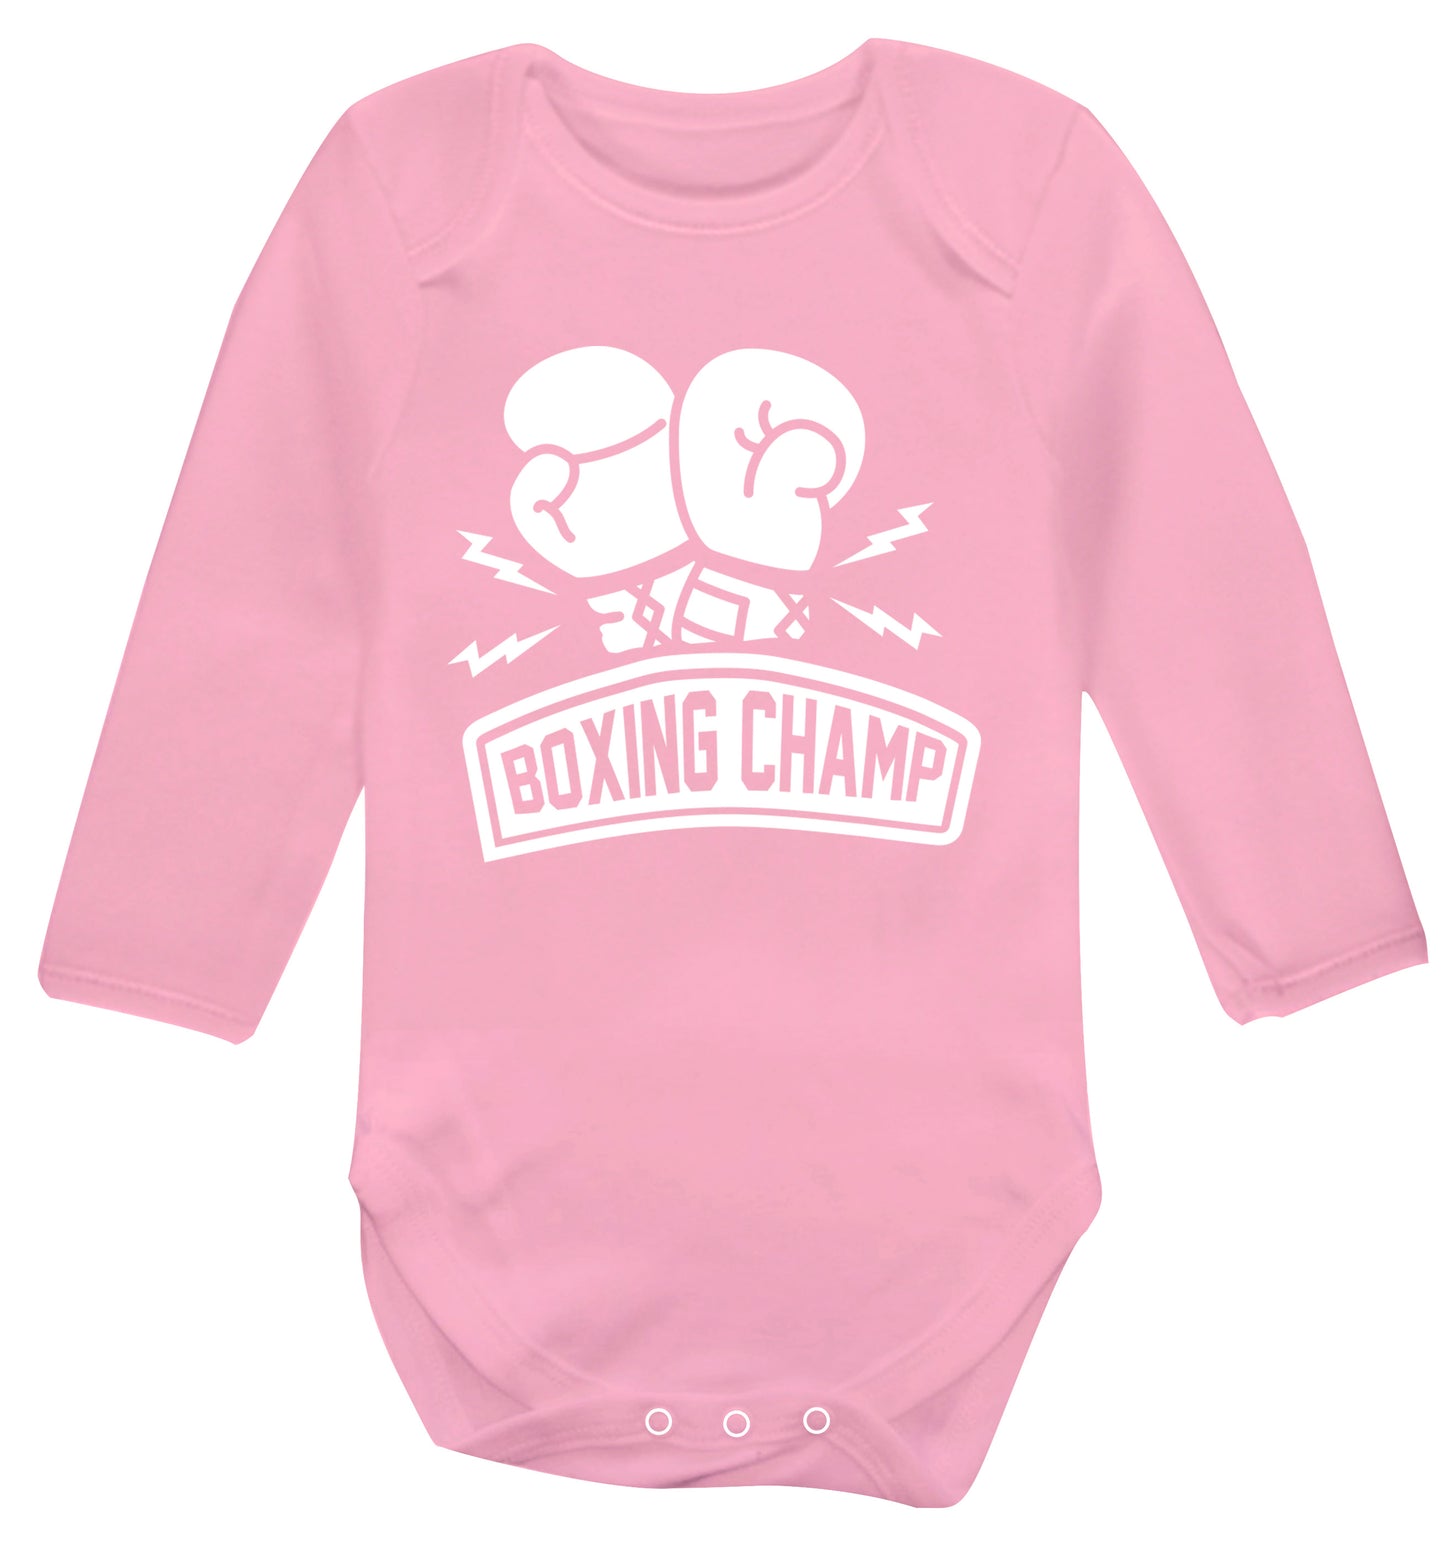 Boxing Champ Baby Vest long sleeved pale pink 6-12 months